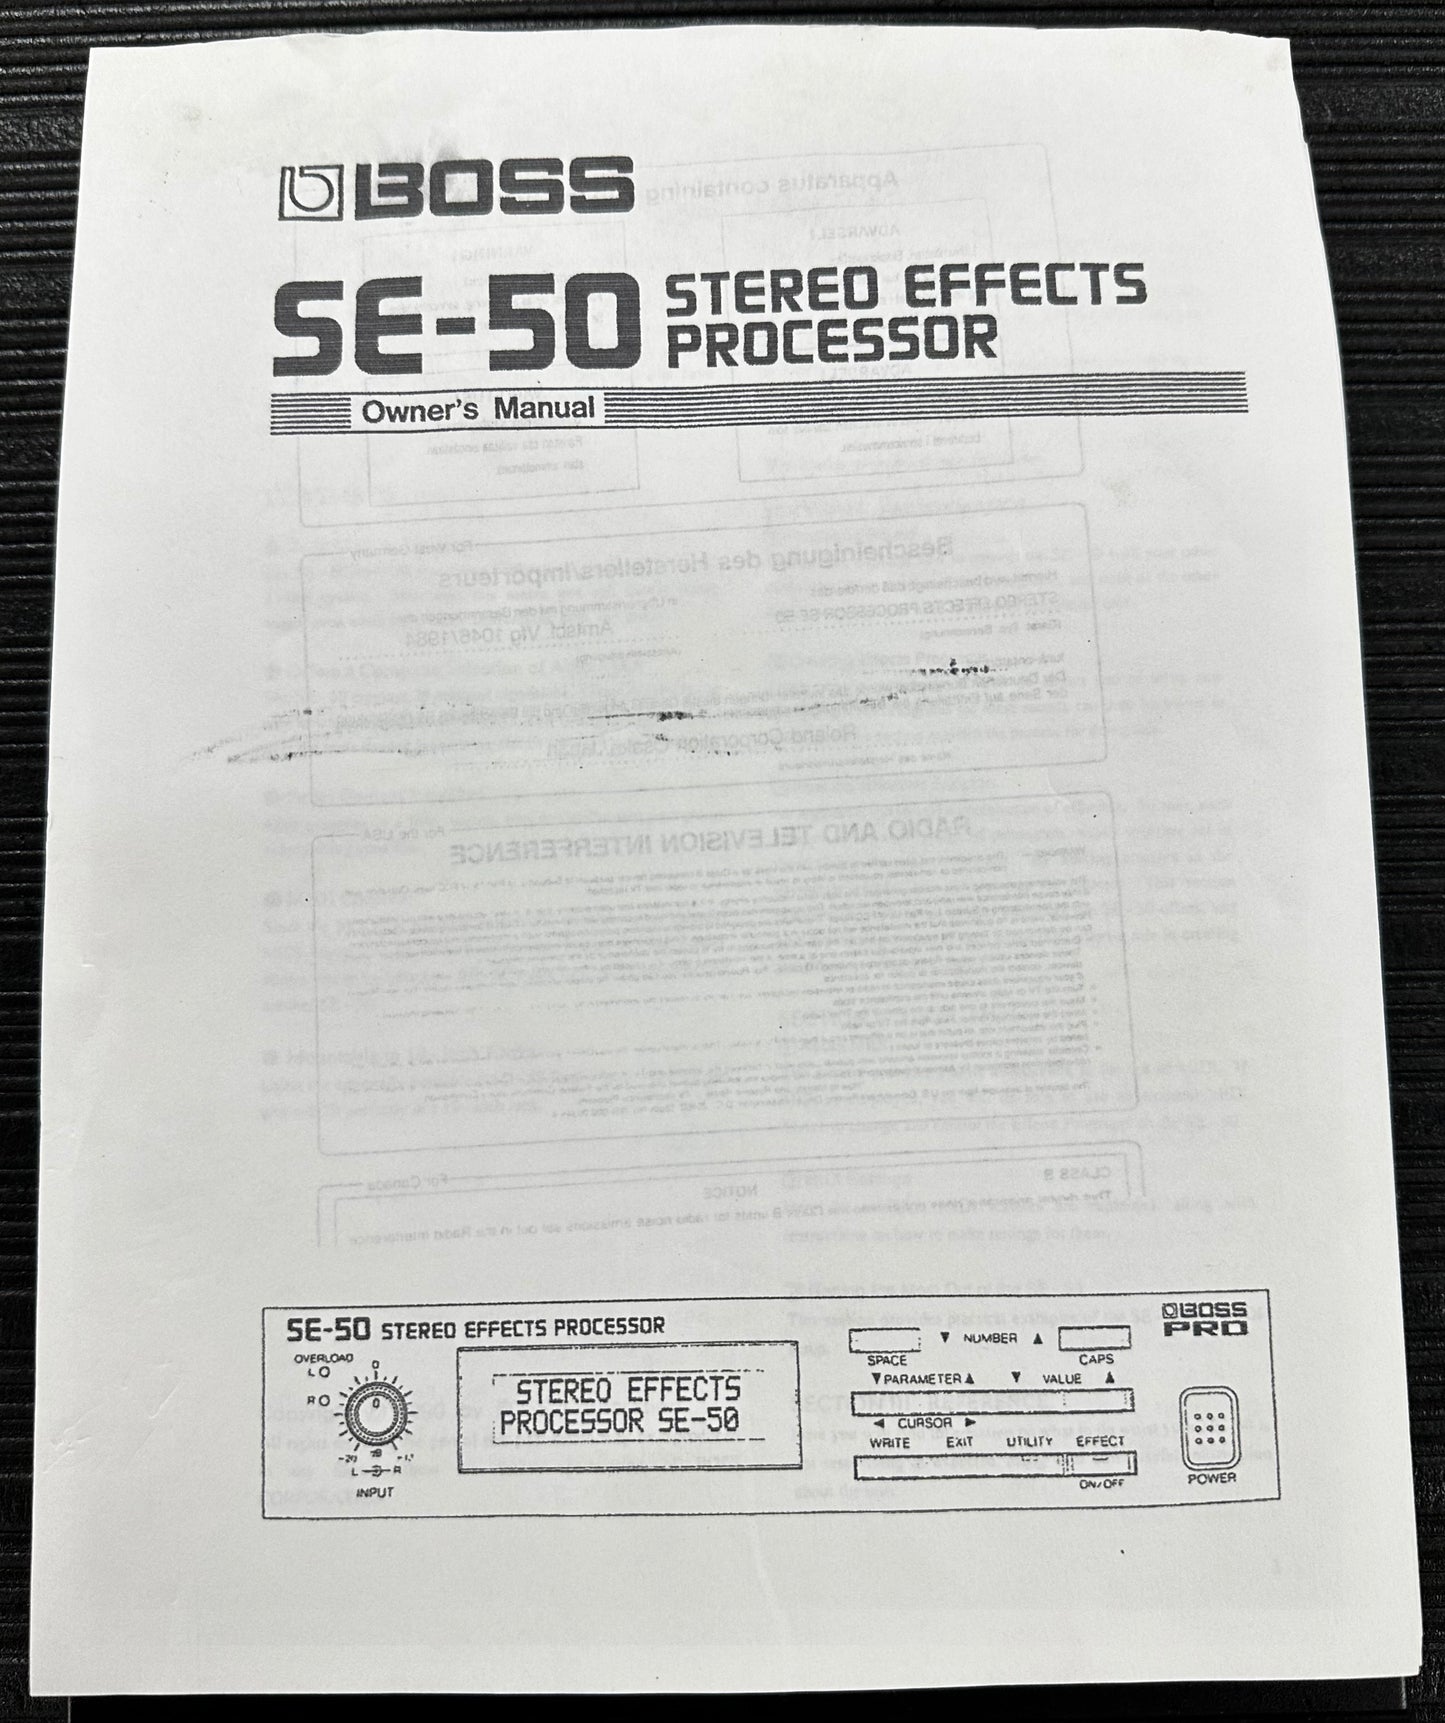 Used 1990's Boss SE-50 Stereo Effects Processor TSS2841 Owner's Manual.